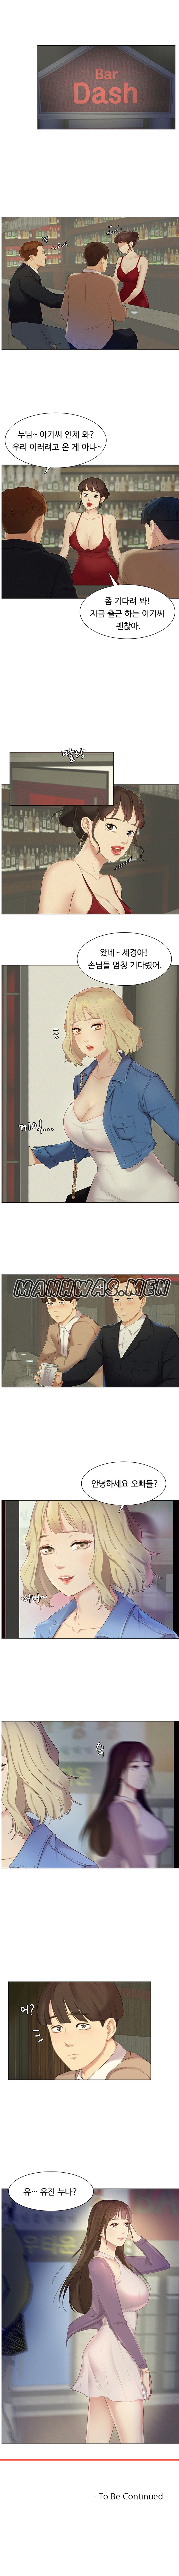 Accountancy Raw - Chapter 1 Page 8